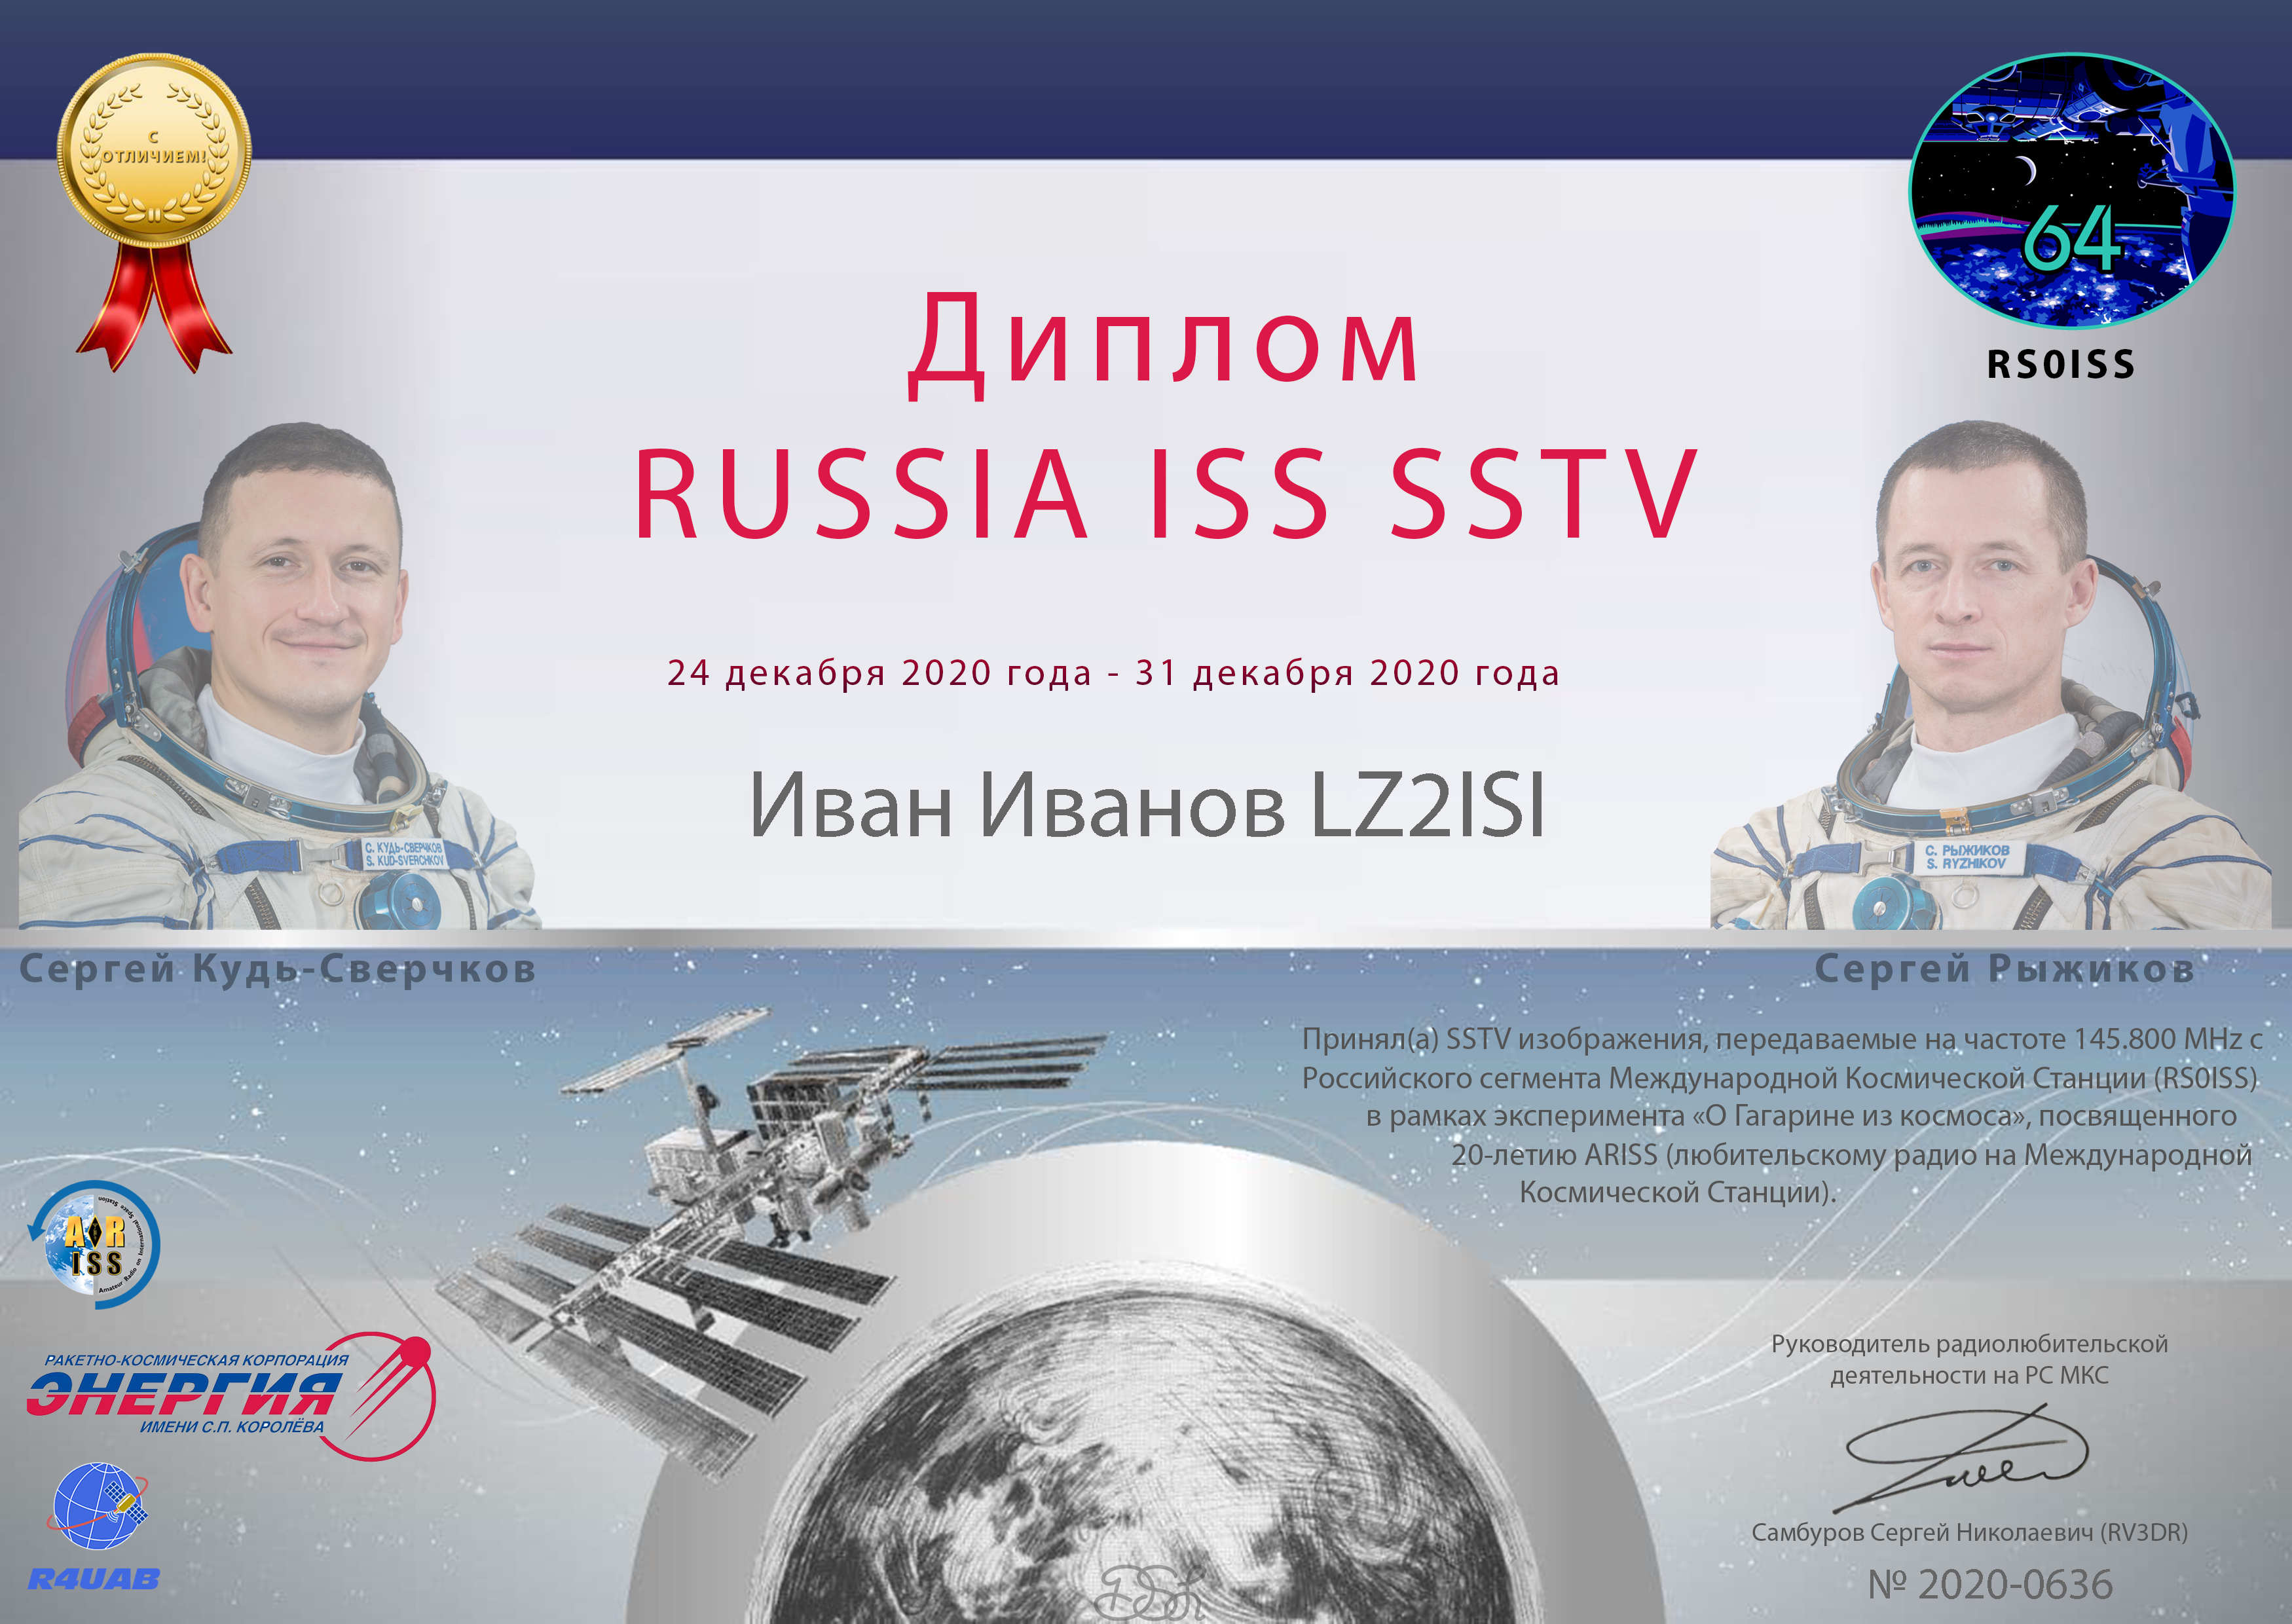 Diploma "Russia ISS SSTV" - LZ2ISI